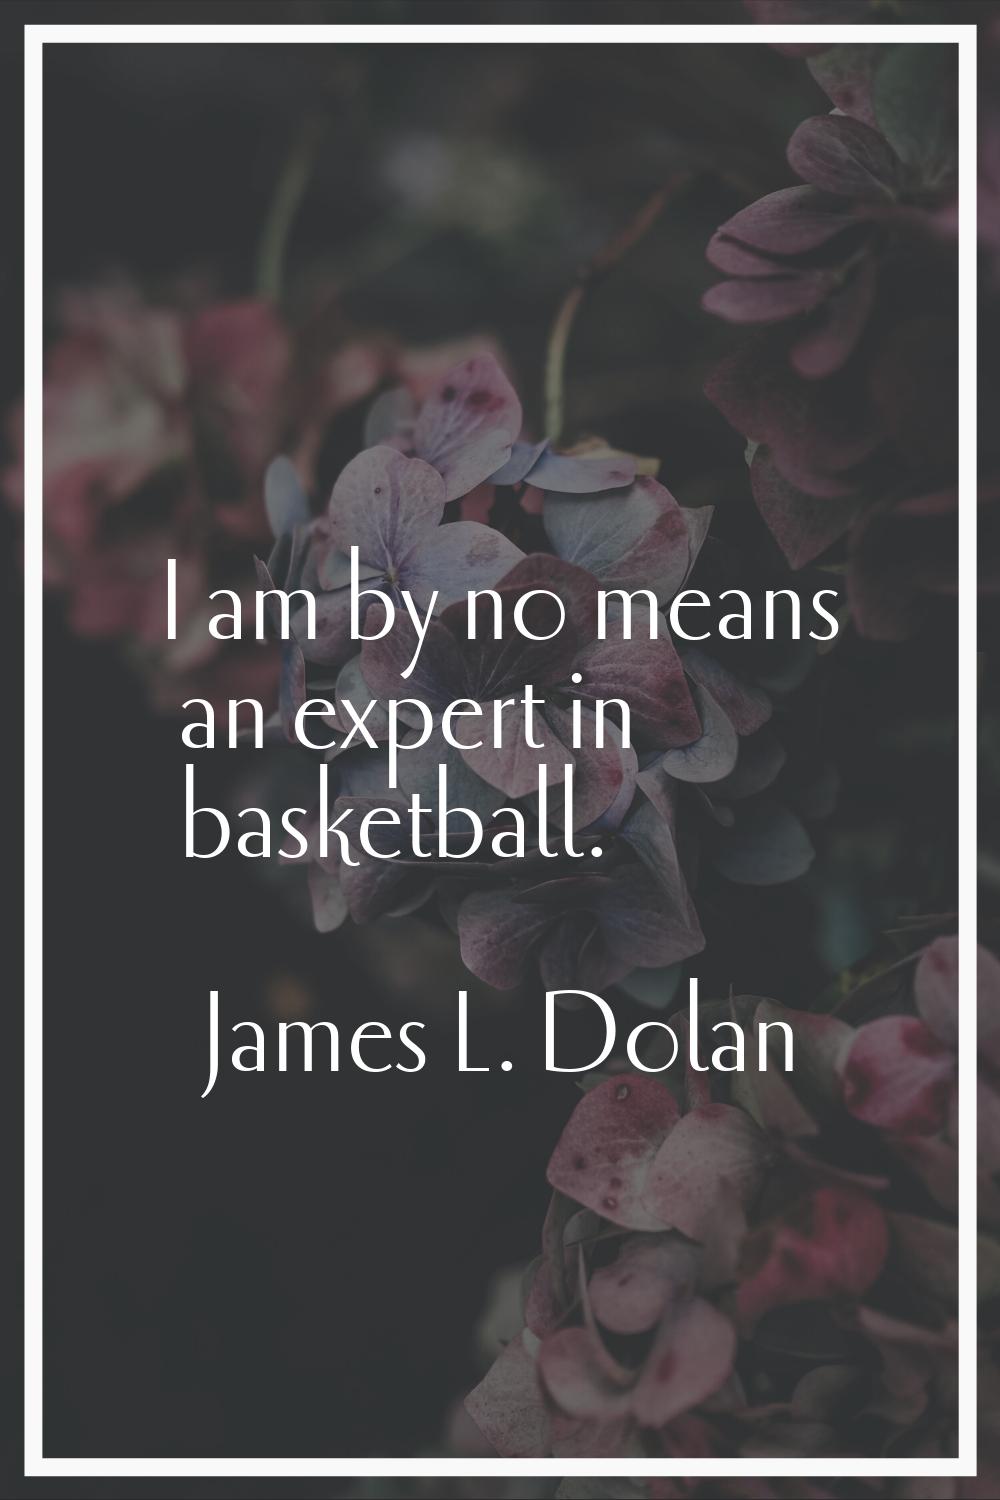 I am by no means an expert in basketball.